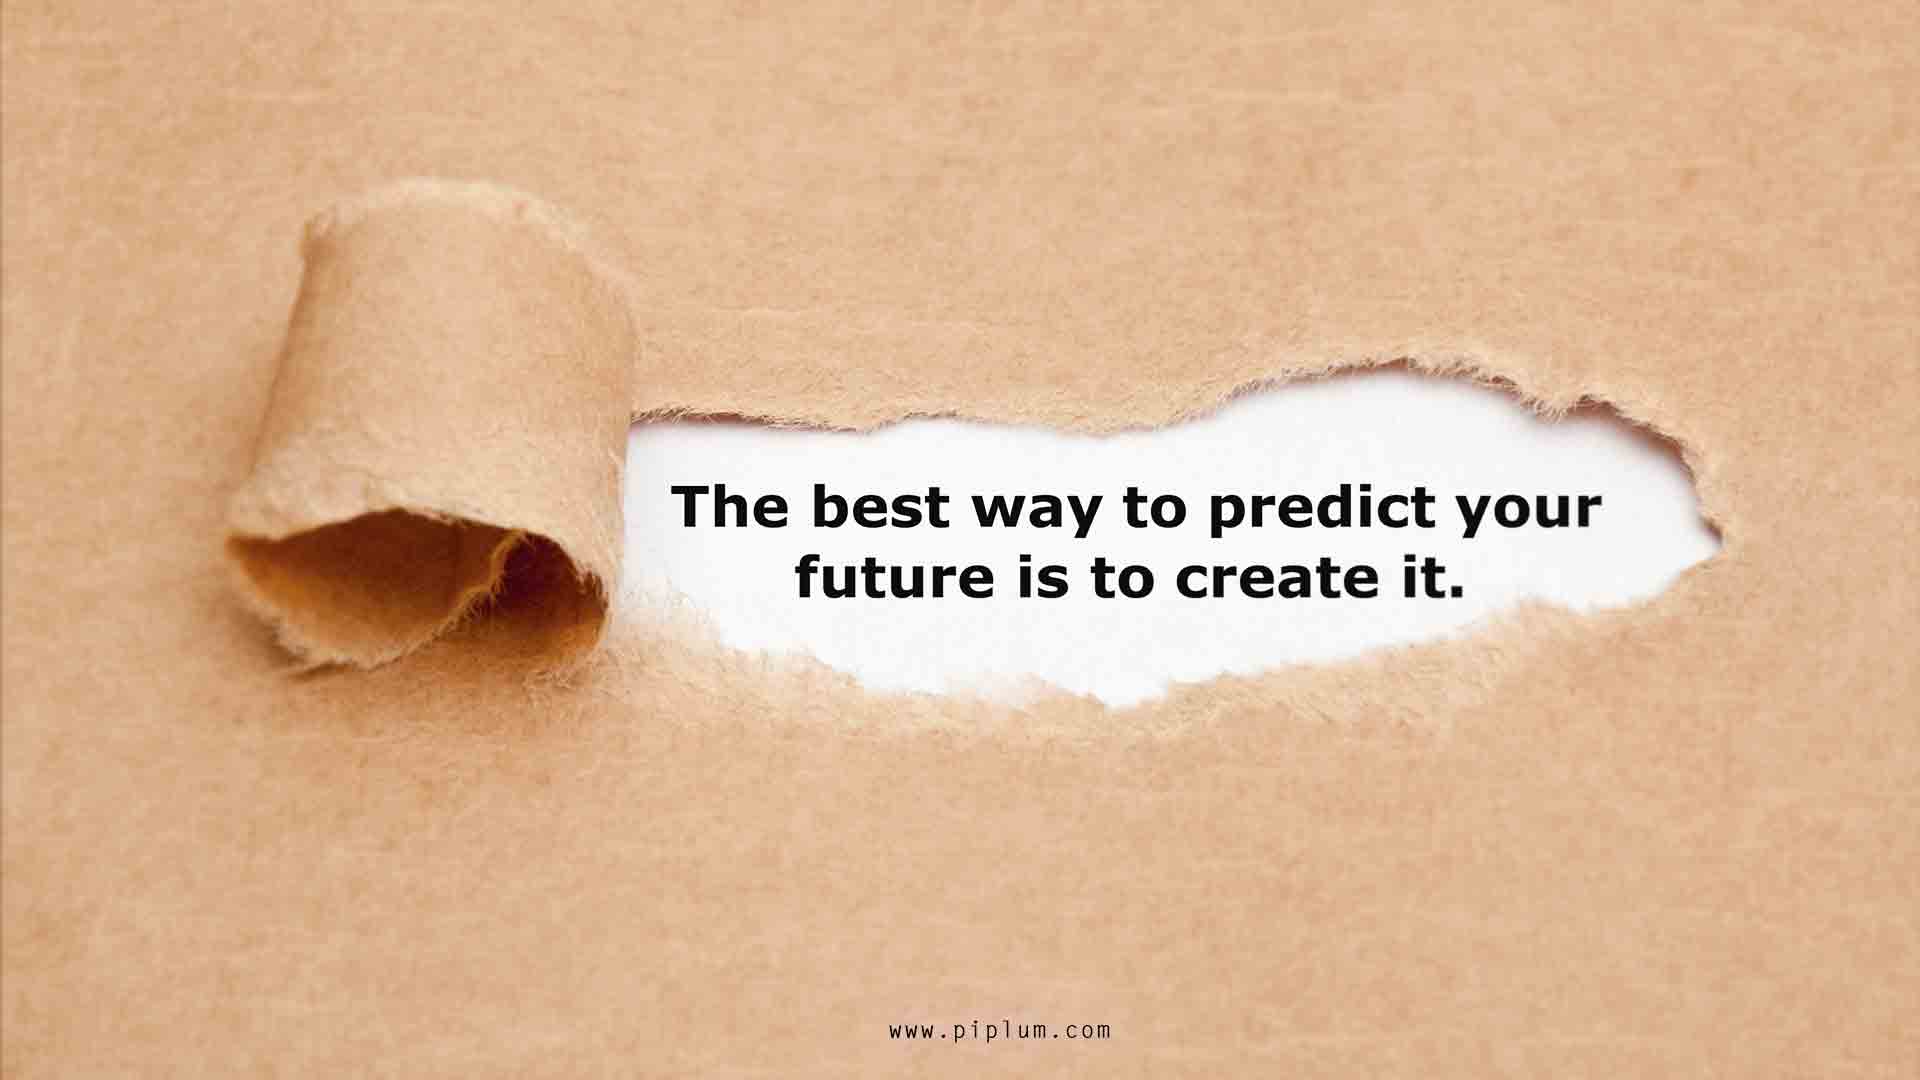 The best way to predict your future is to create it. Inspirational quote.